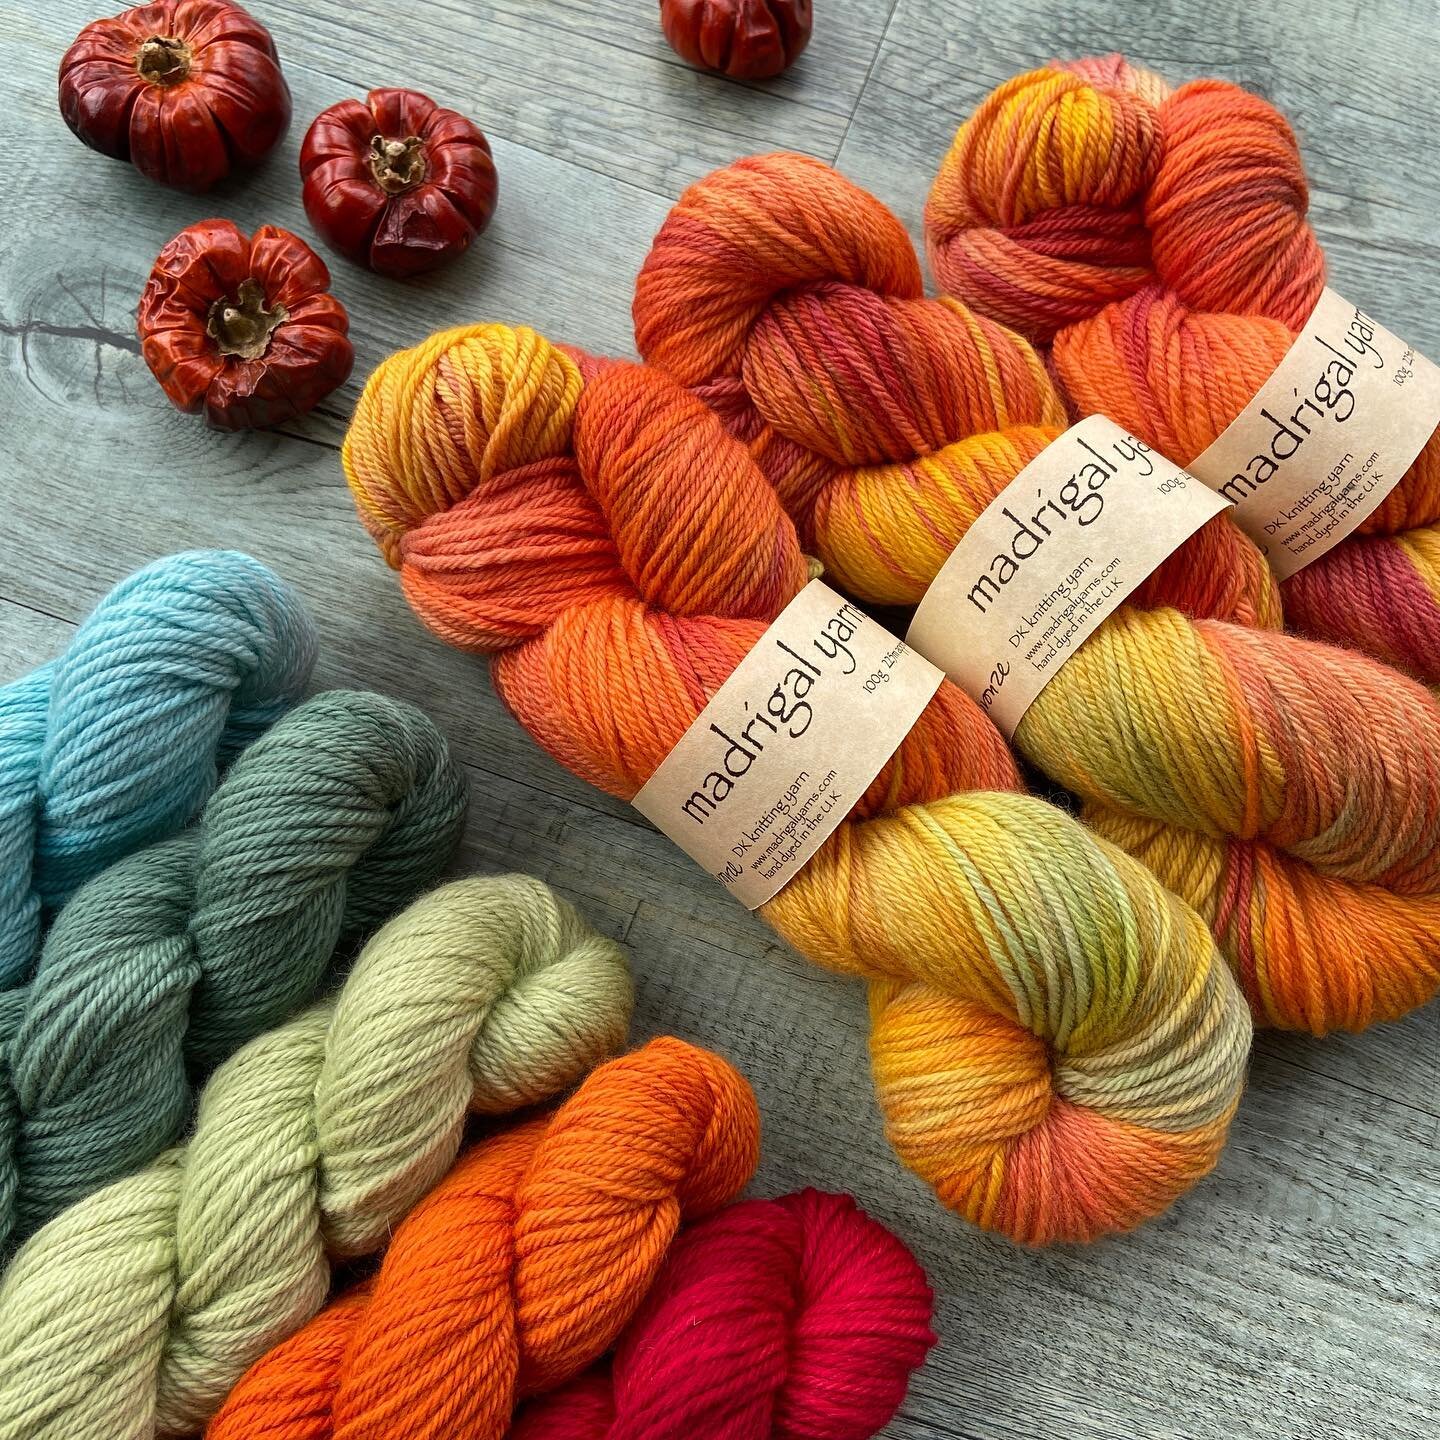 My first colour complements for Autumn Bronze are (L-R) Hera, Poseidon, Ferntastic, Jamie Lee, Crimson Loch. There are boundless adventures in knitting and crochet here #yarnstore #knittersofinstagram #crochet #crochetersofinstagram #crochetyarn #cro